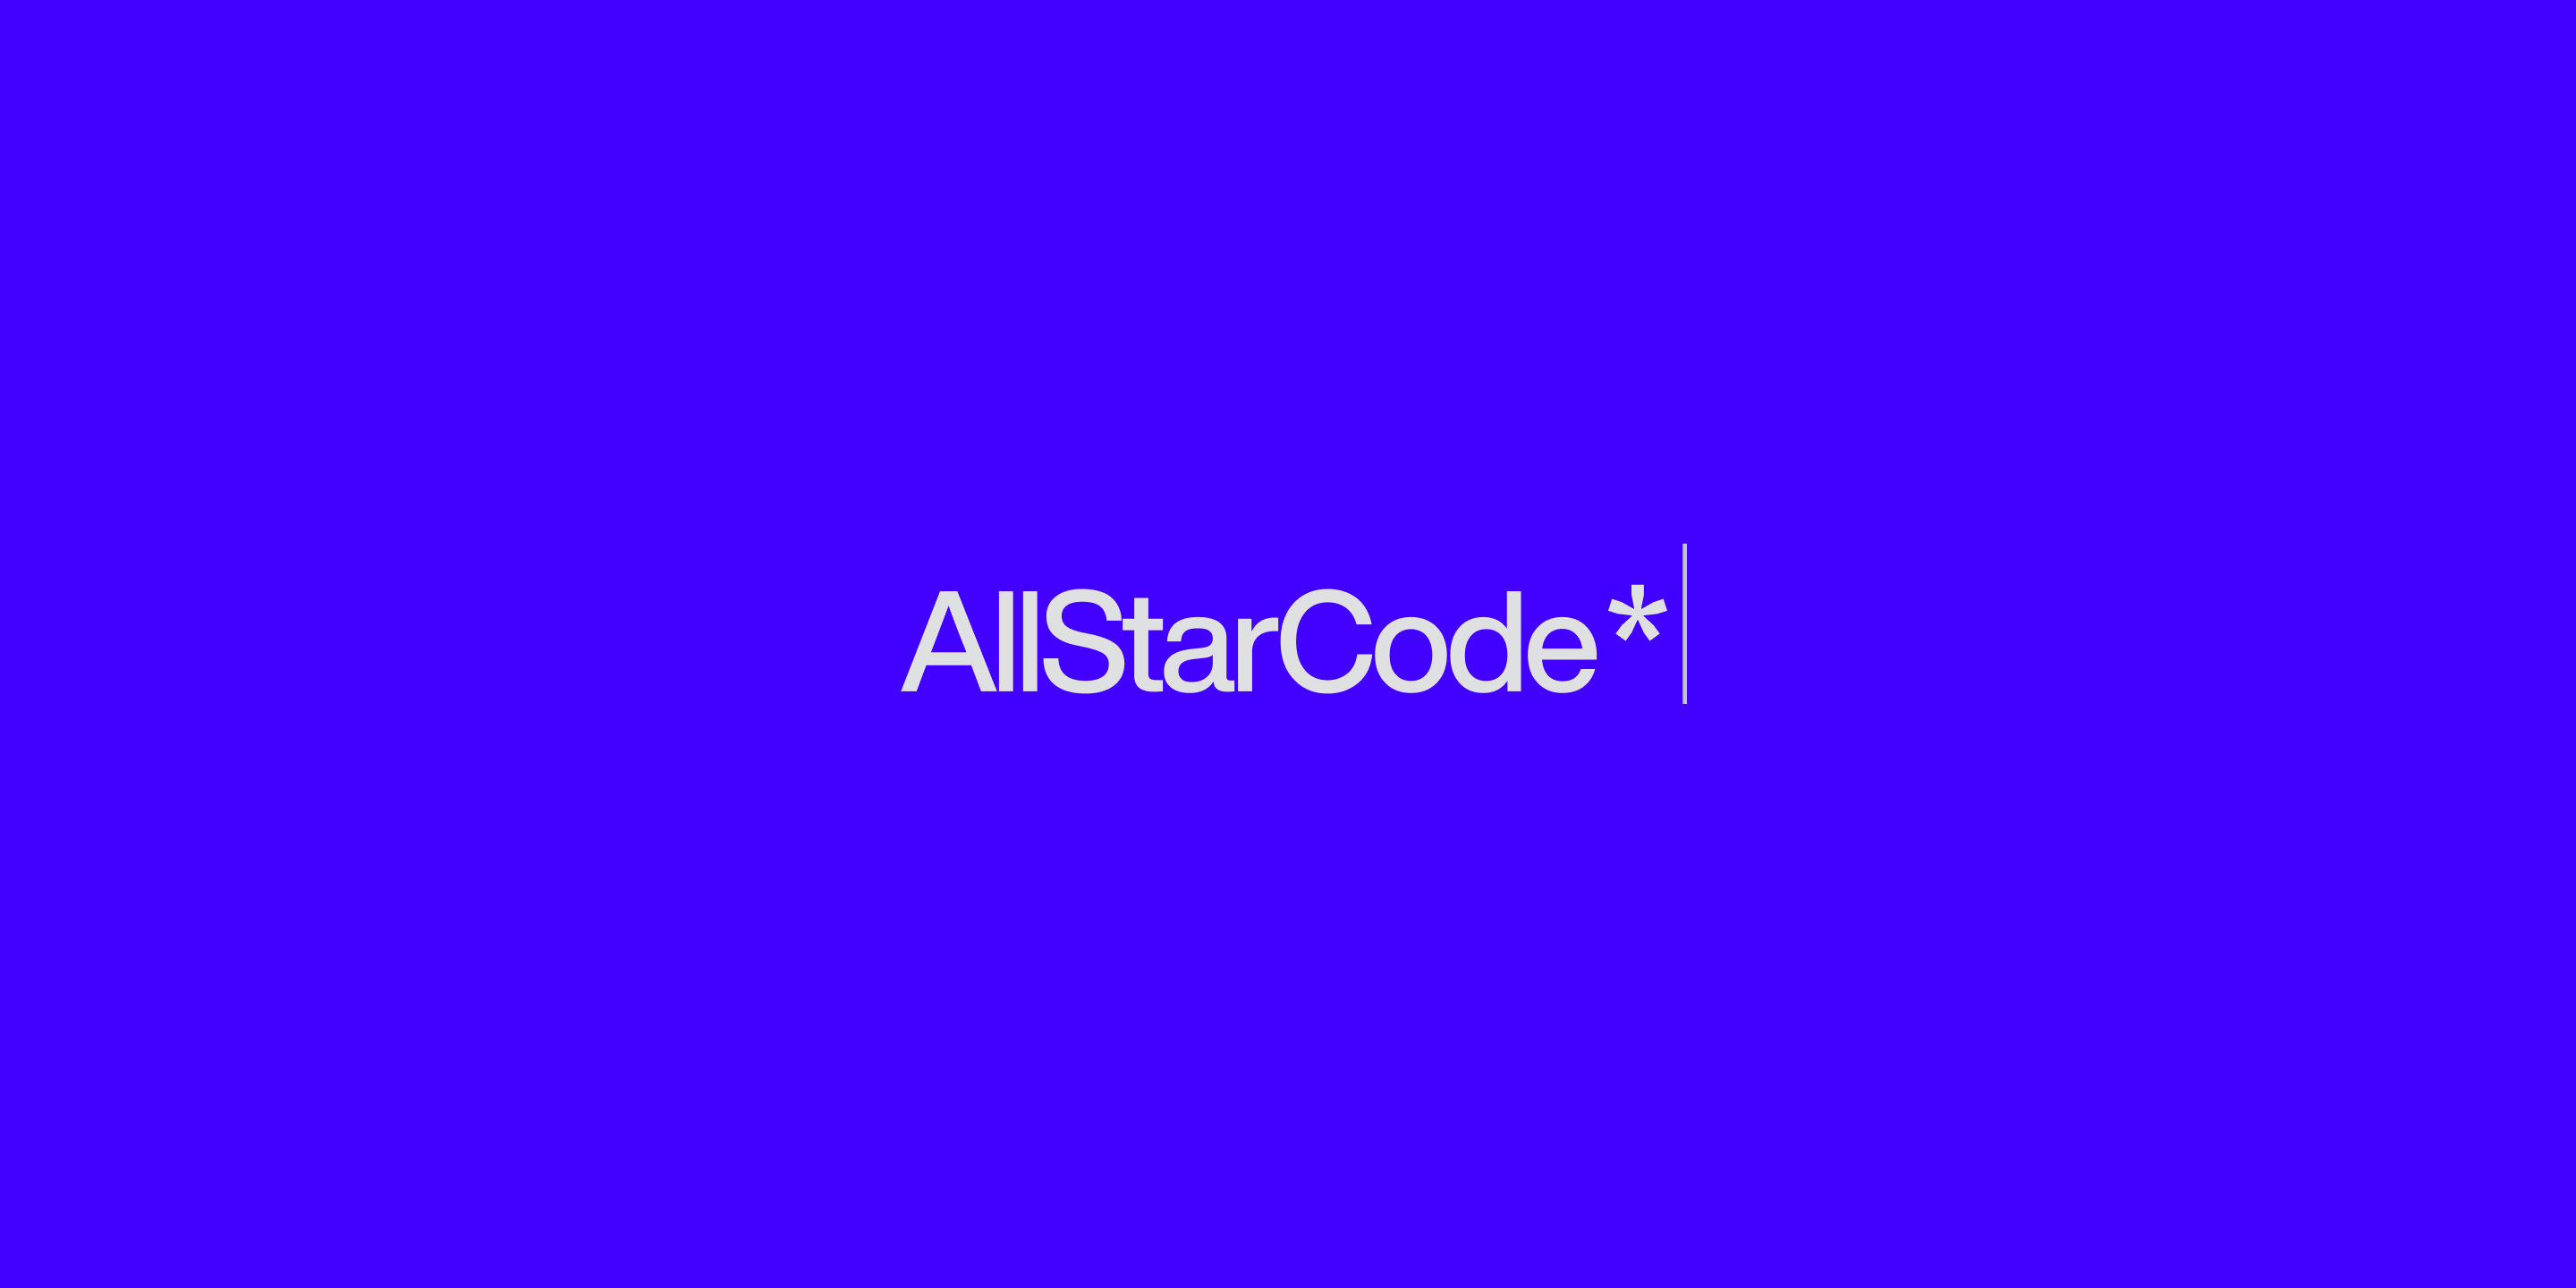 Elephant Borrows Cues from Code on New Identity for All Star Code